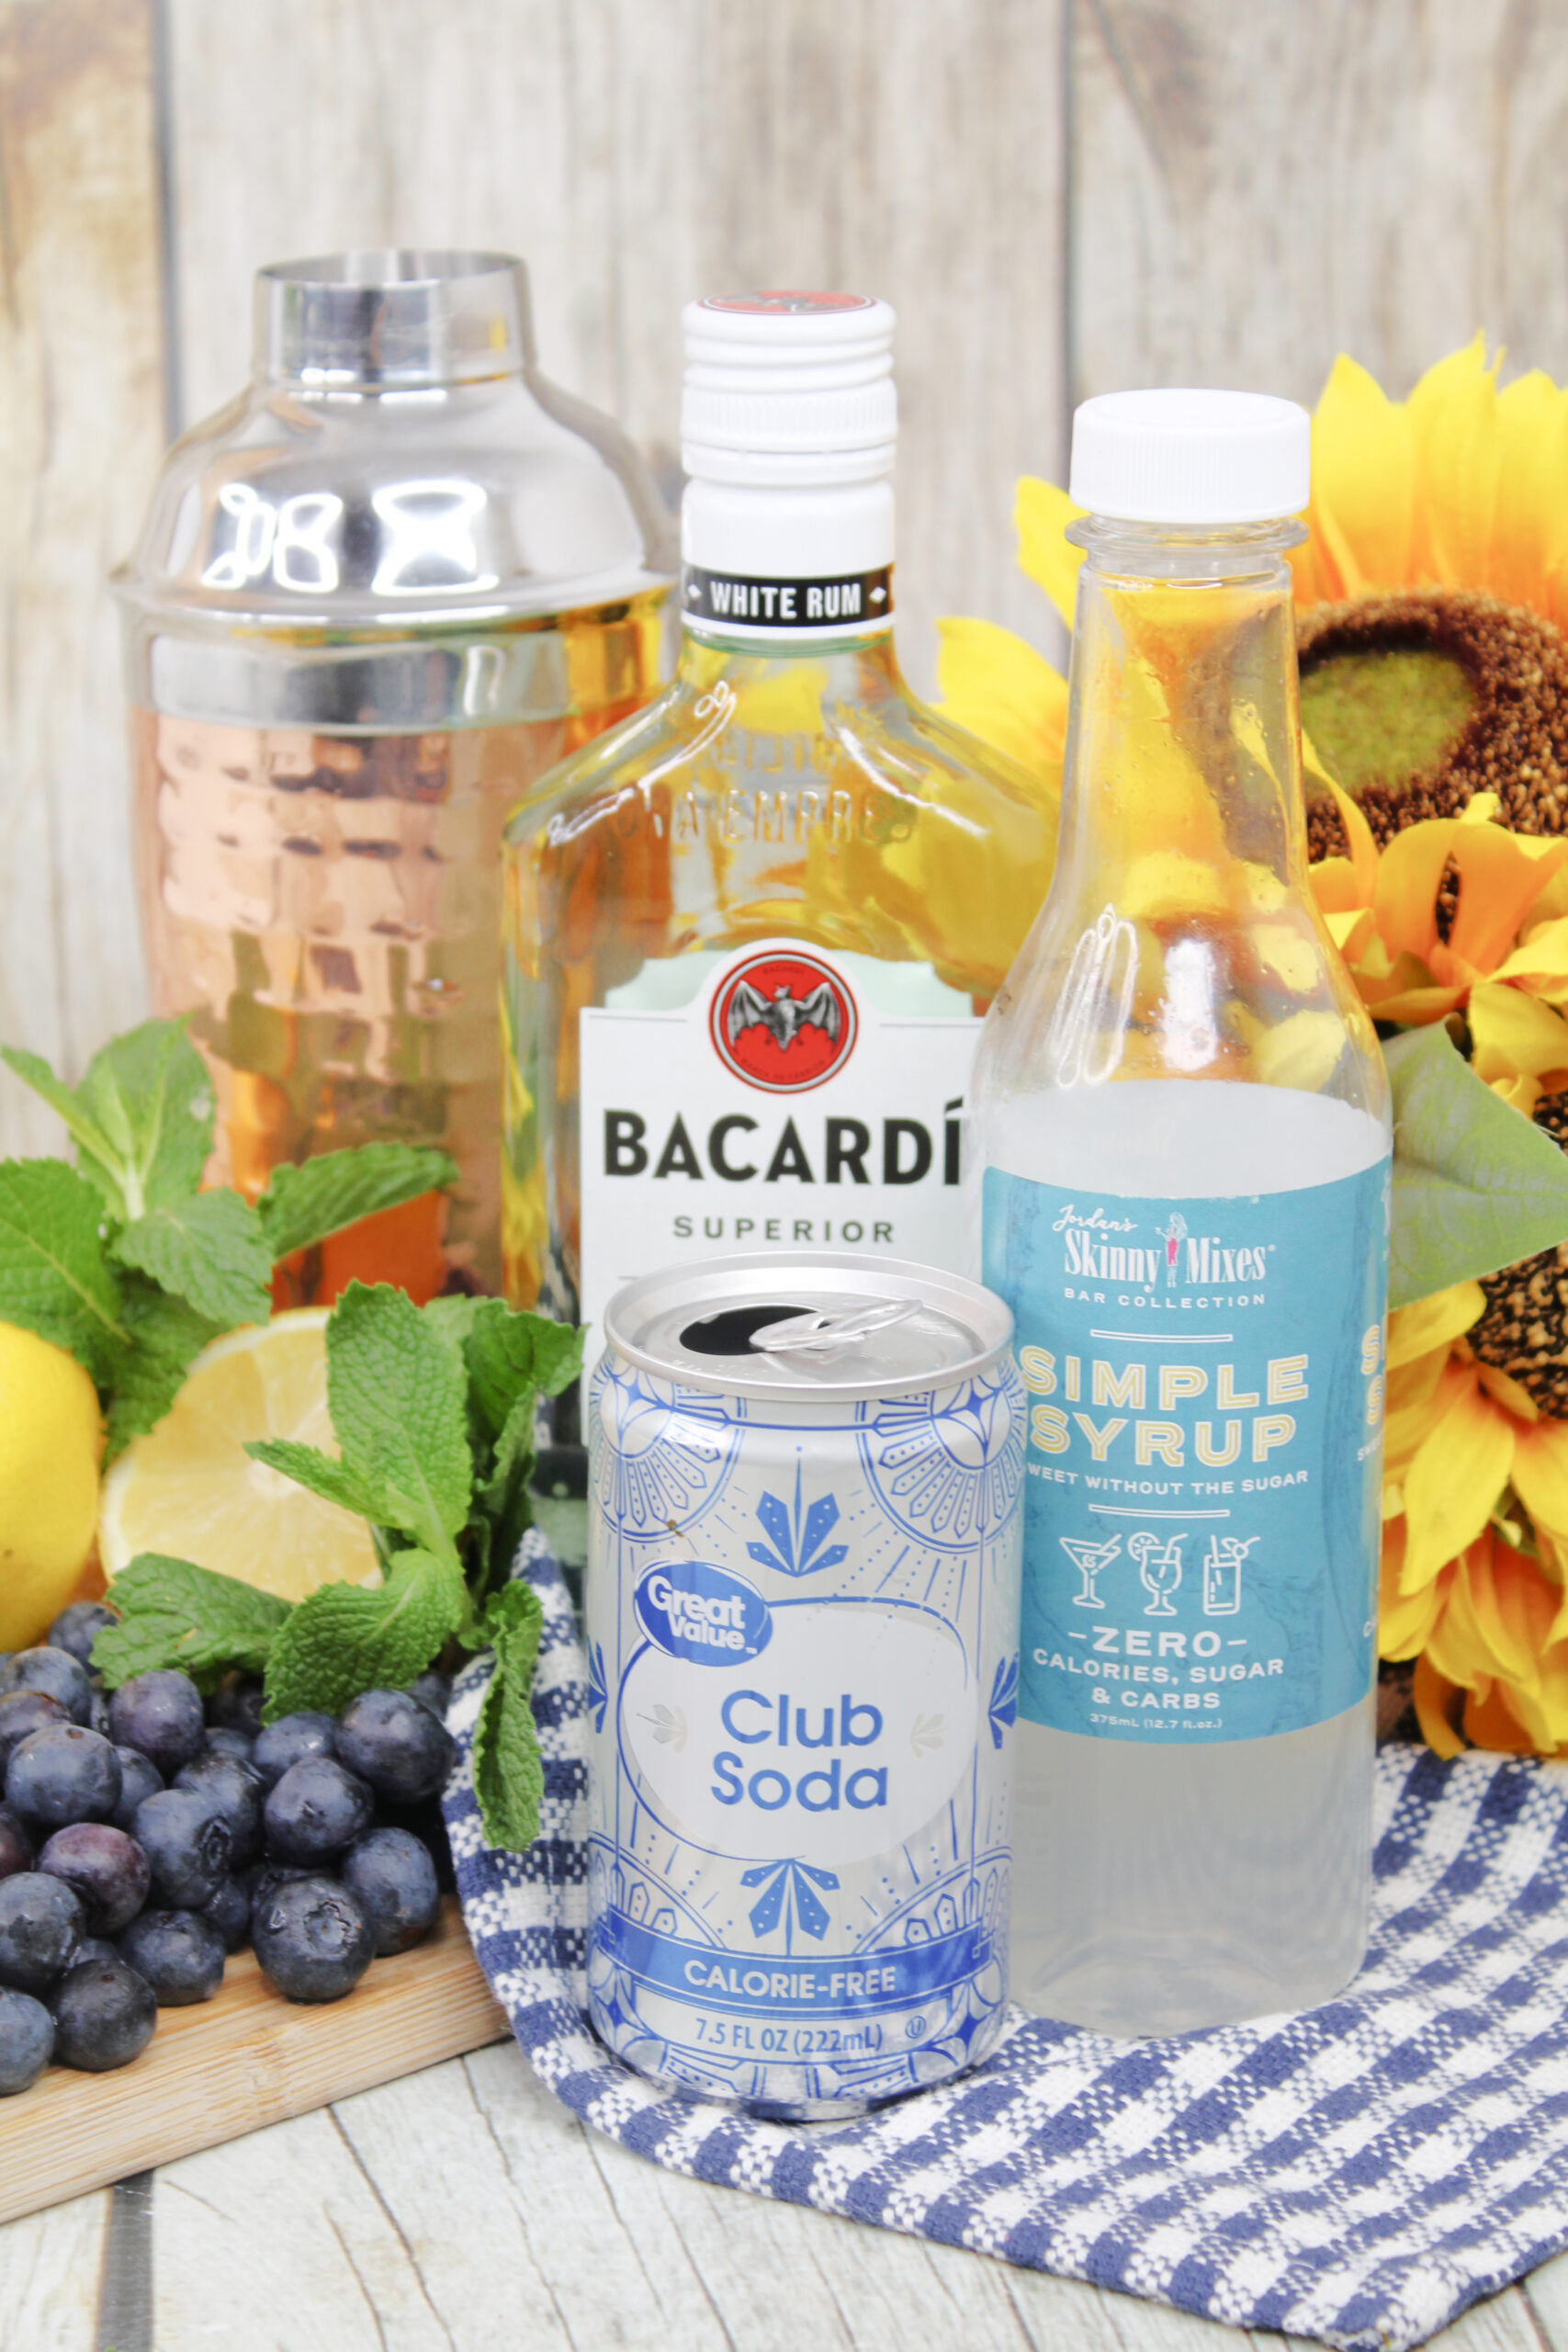 All the ingredients to make a blueberry lemonade mojito with garnishes of mint and sliced lemon!